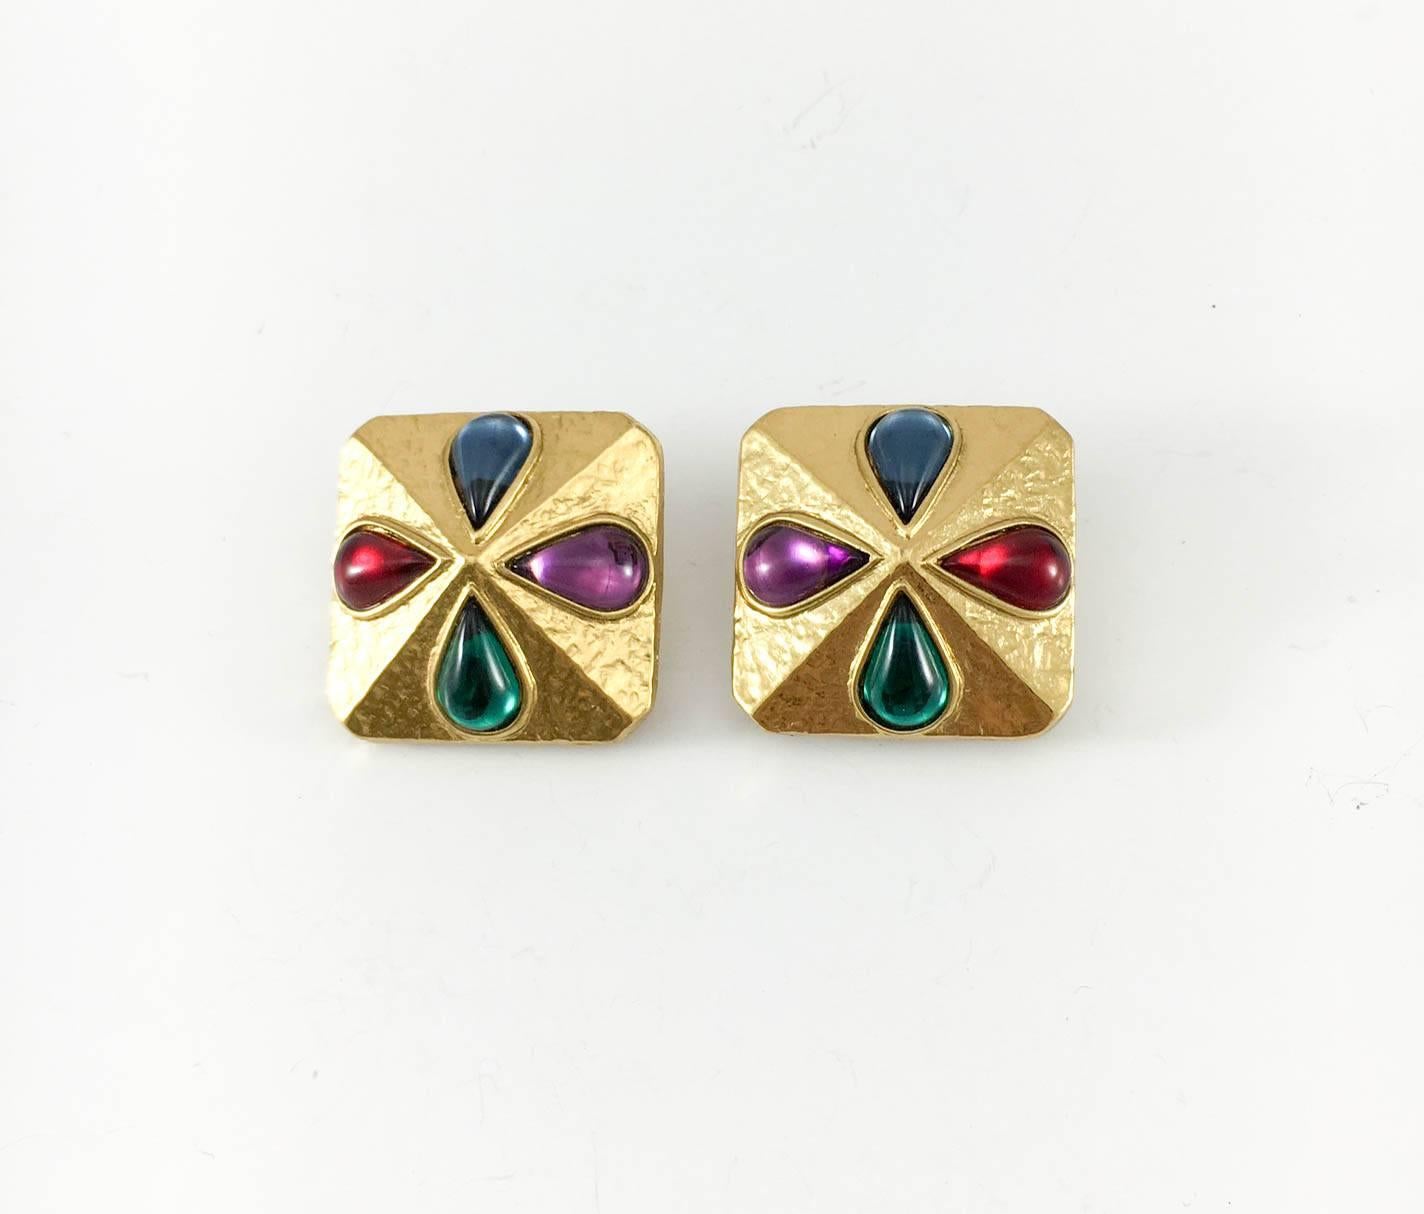 Vintage Yves Saint Laurent Gripoix Gold-Plated Clip-on Earring. These gorgeous Yves Saint Laurent earrings by Robert Goossens are gold-plated and feature deep emerald green, ruby red, amethyst purple and aqua marine blue Gripoix (poured glass)